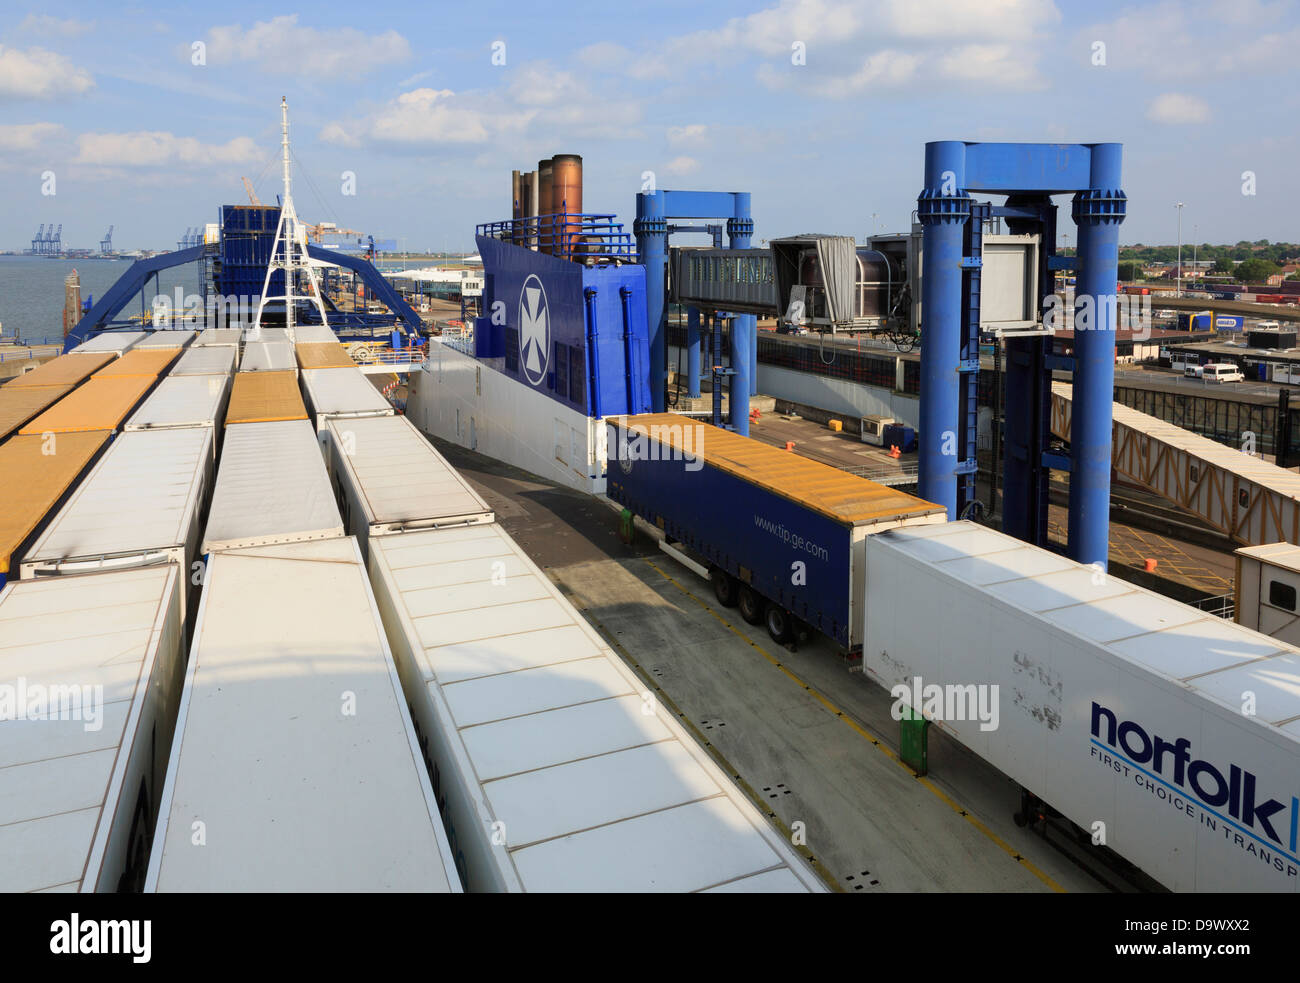 Container trucks on DFDS ferry Sirena Seaways for Denmark docked at Parkeston Quay Harwich International Port Essex England UK Stock Photo